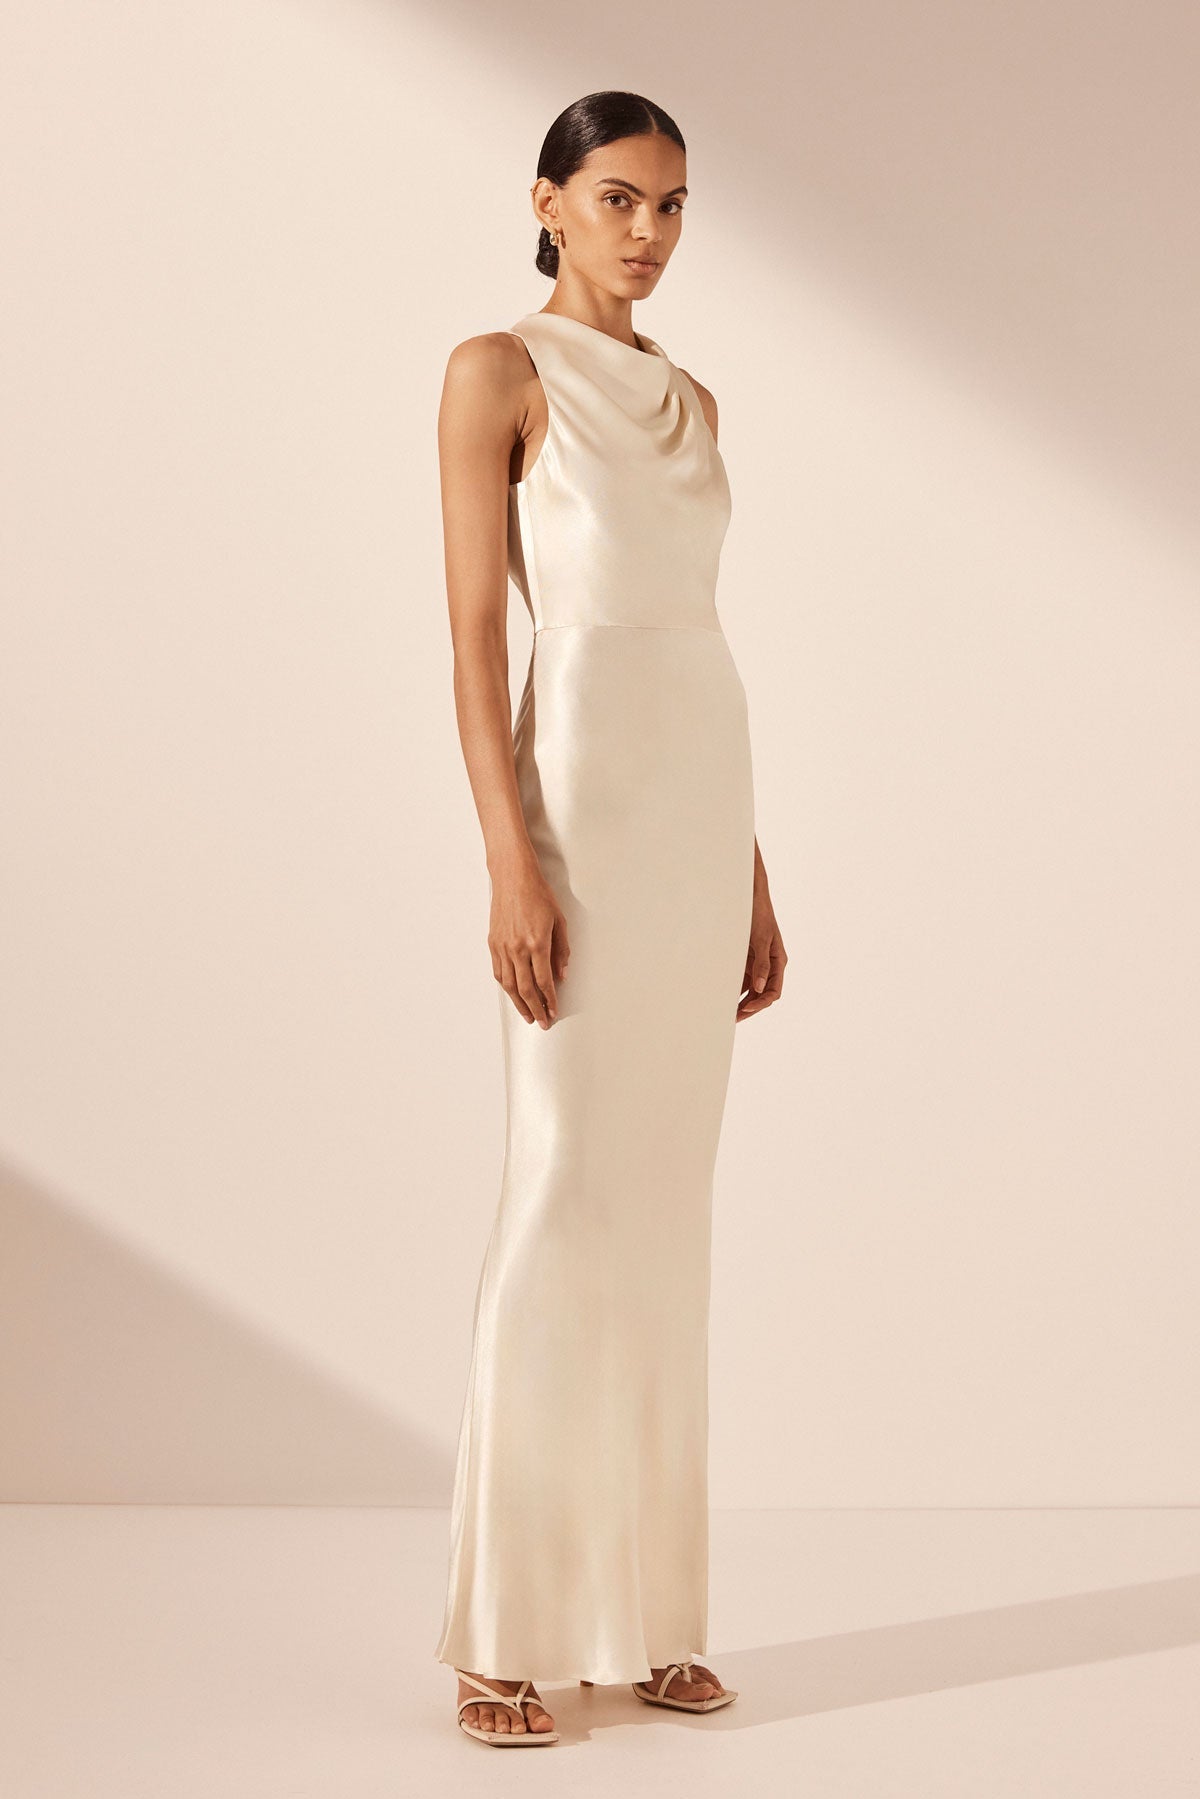 Sequin High Neck Sleeveless Gown in Cream | LAPOINTE